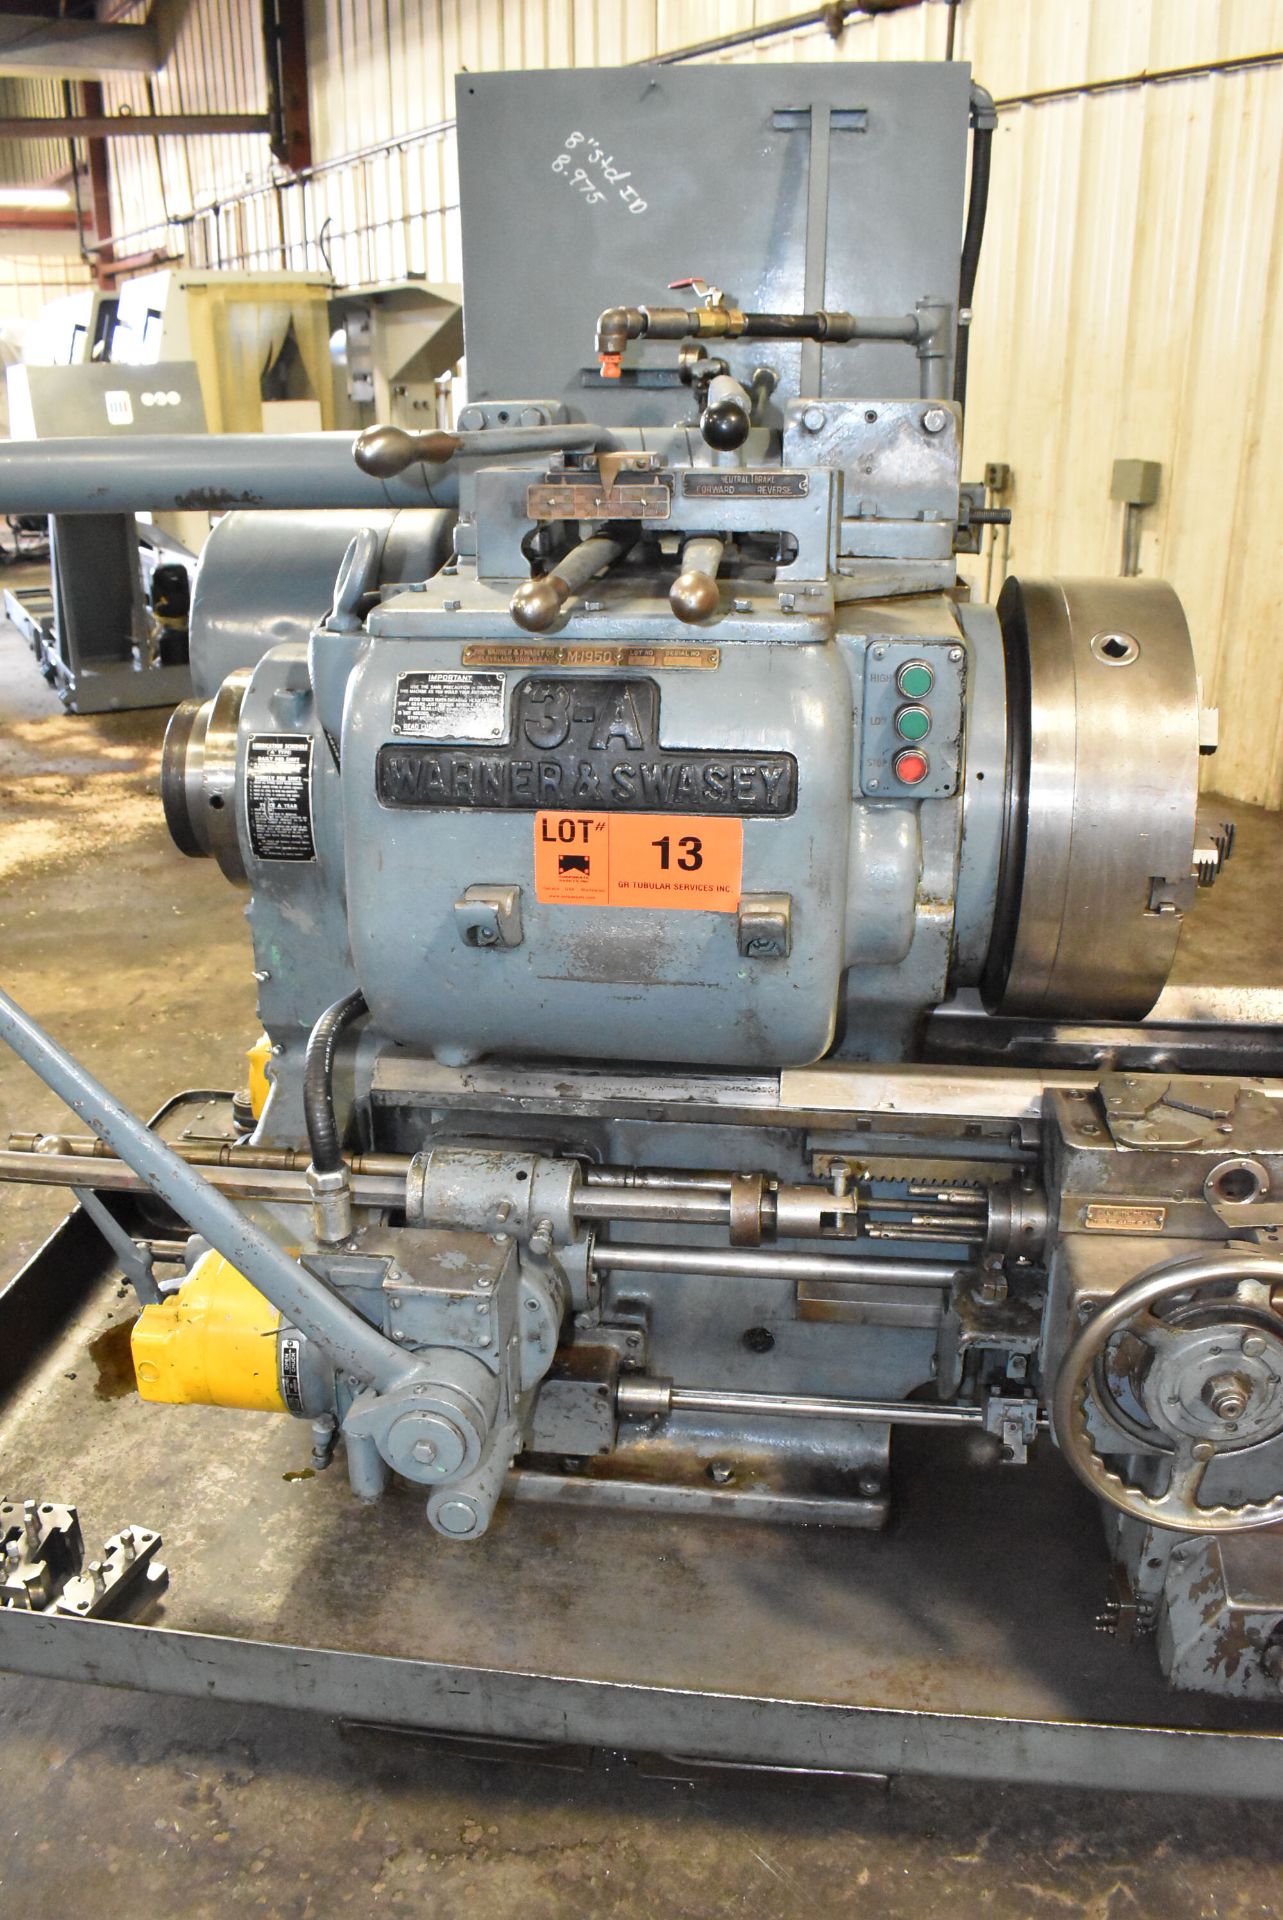 WARNER & SWASEY 3A TURRET LATHE WITH 24" SWING OVER BED, 52" DISTANCE BETWEEN CENTERS, 6.25" SPINDLE - Image 3 of 9